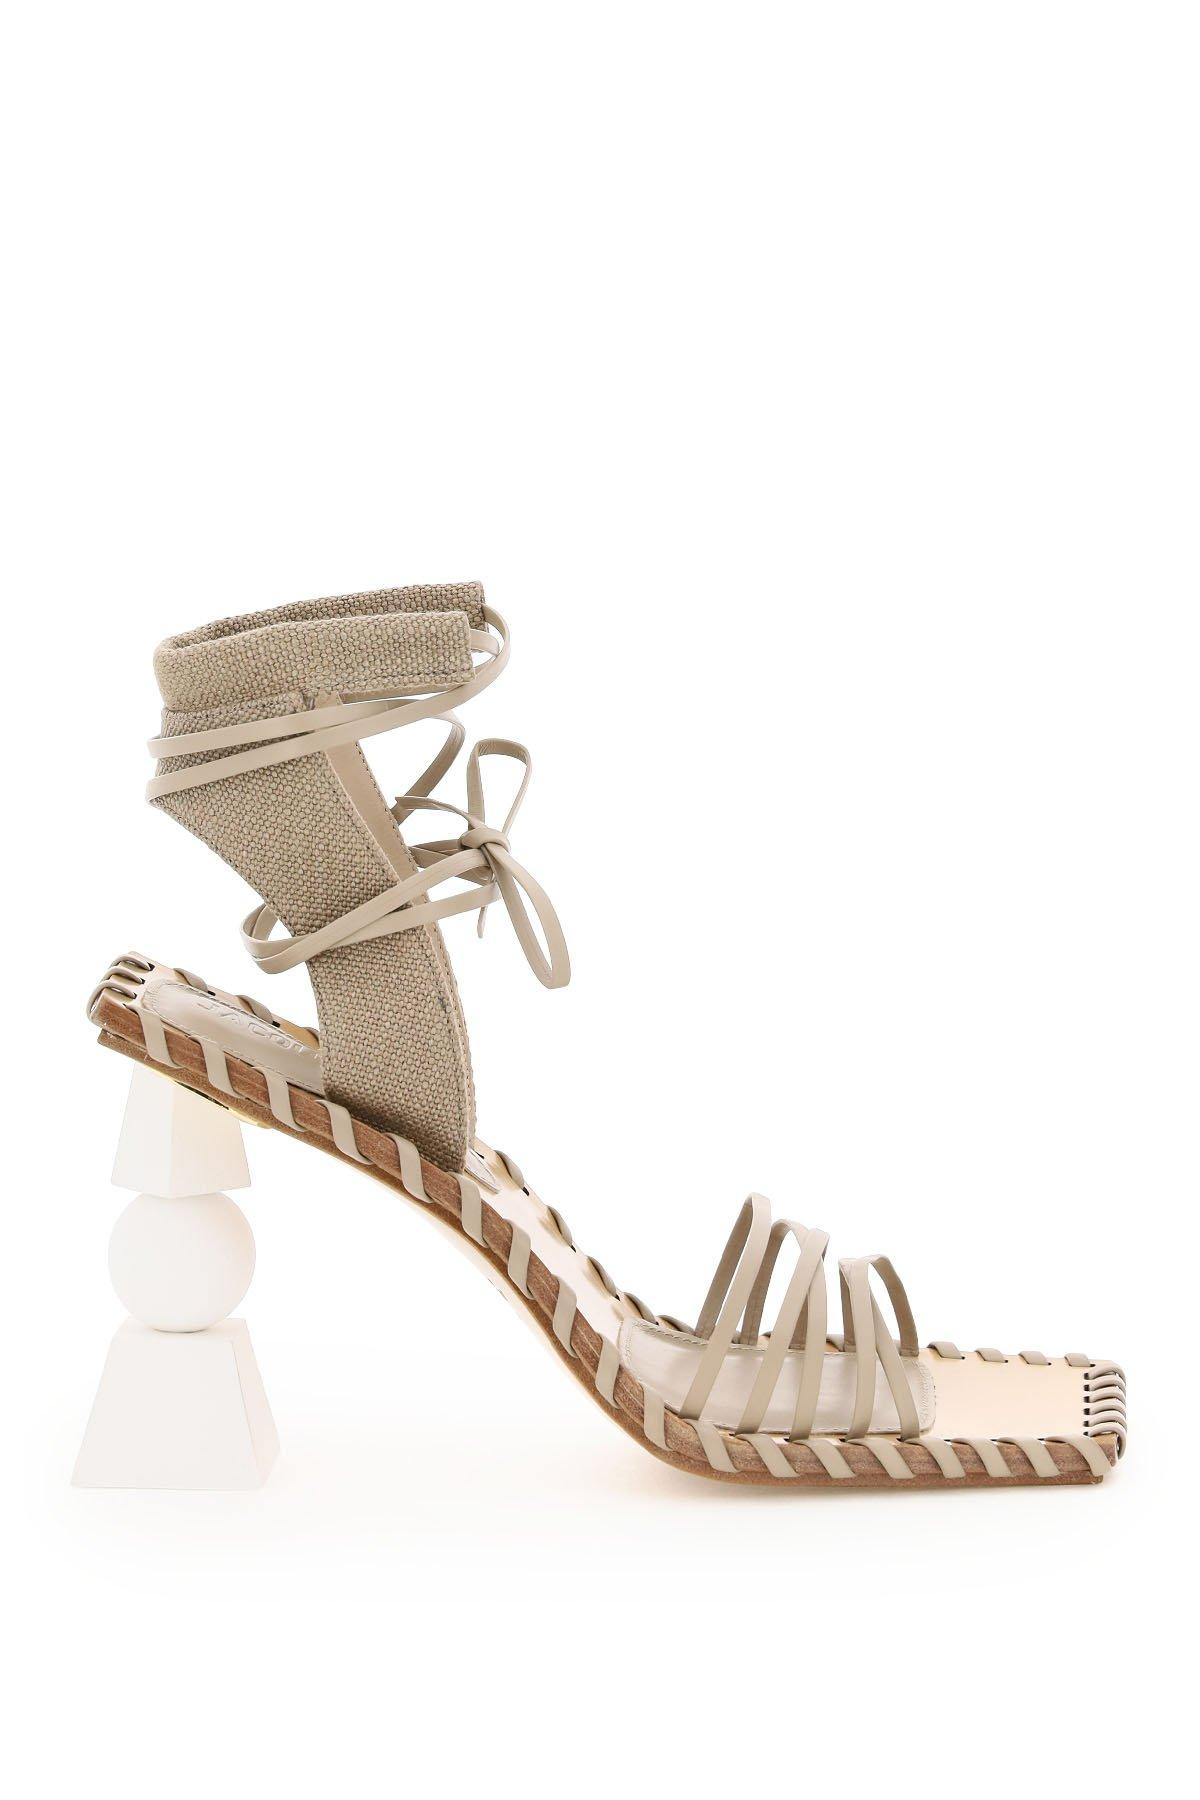 Jacquemus Leather Valérie Sandals in Brown - Save 6% - Lyst